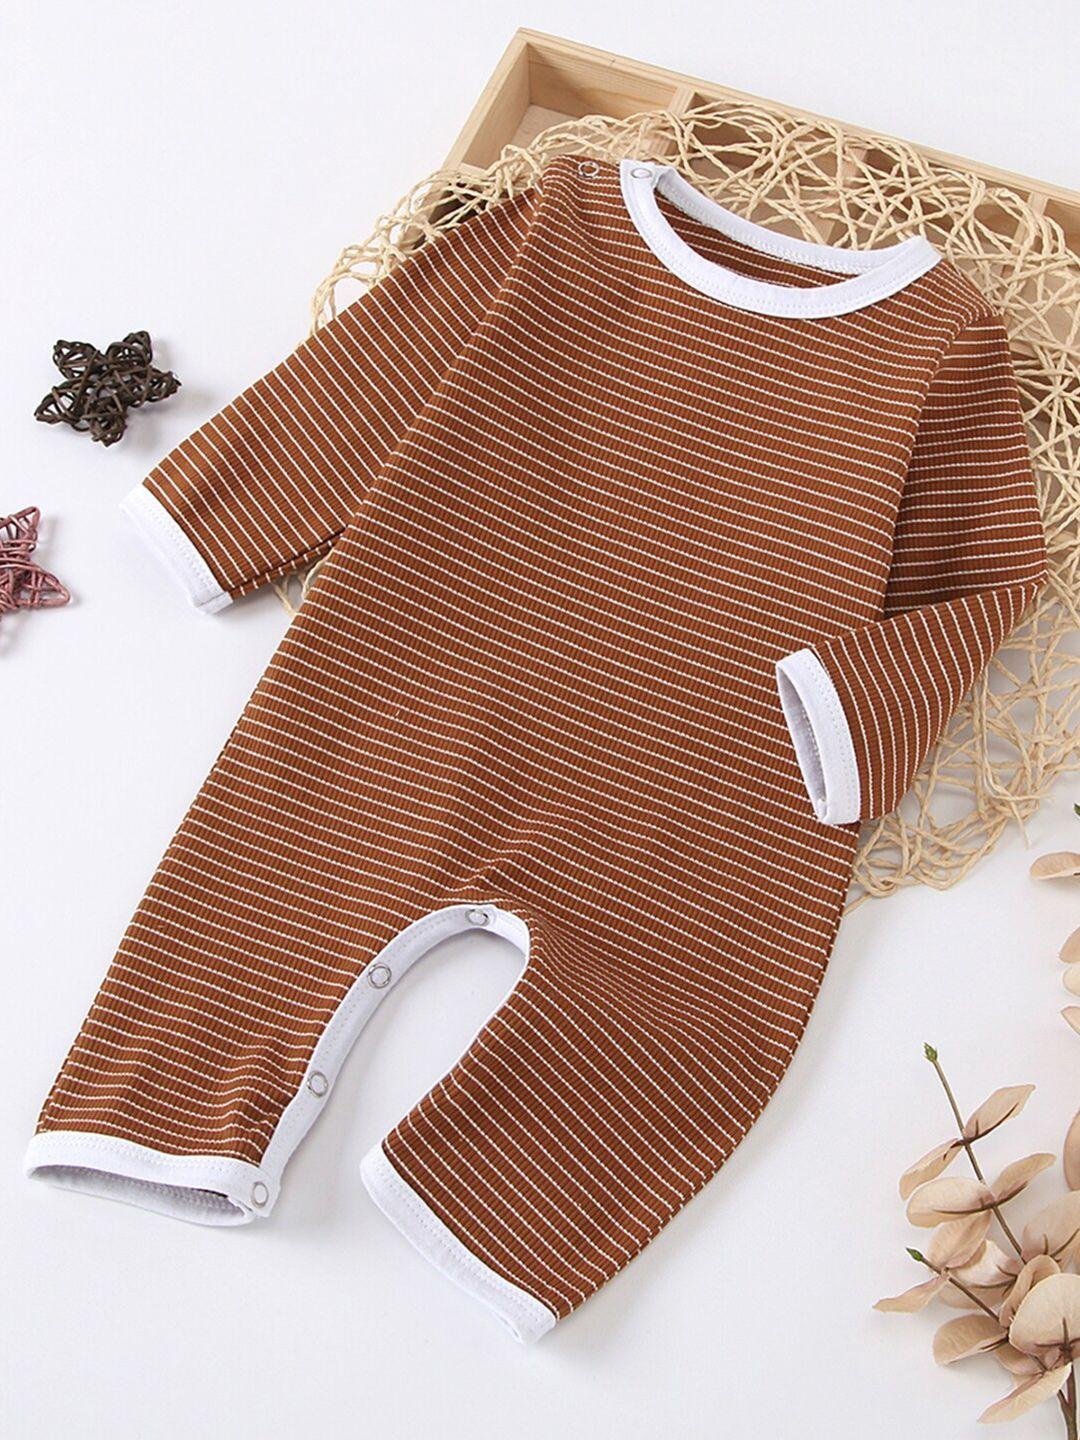 stylecast-girls-striped-cotton-rompers